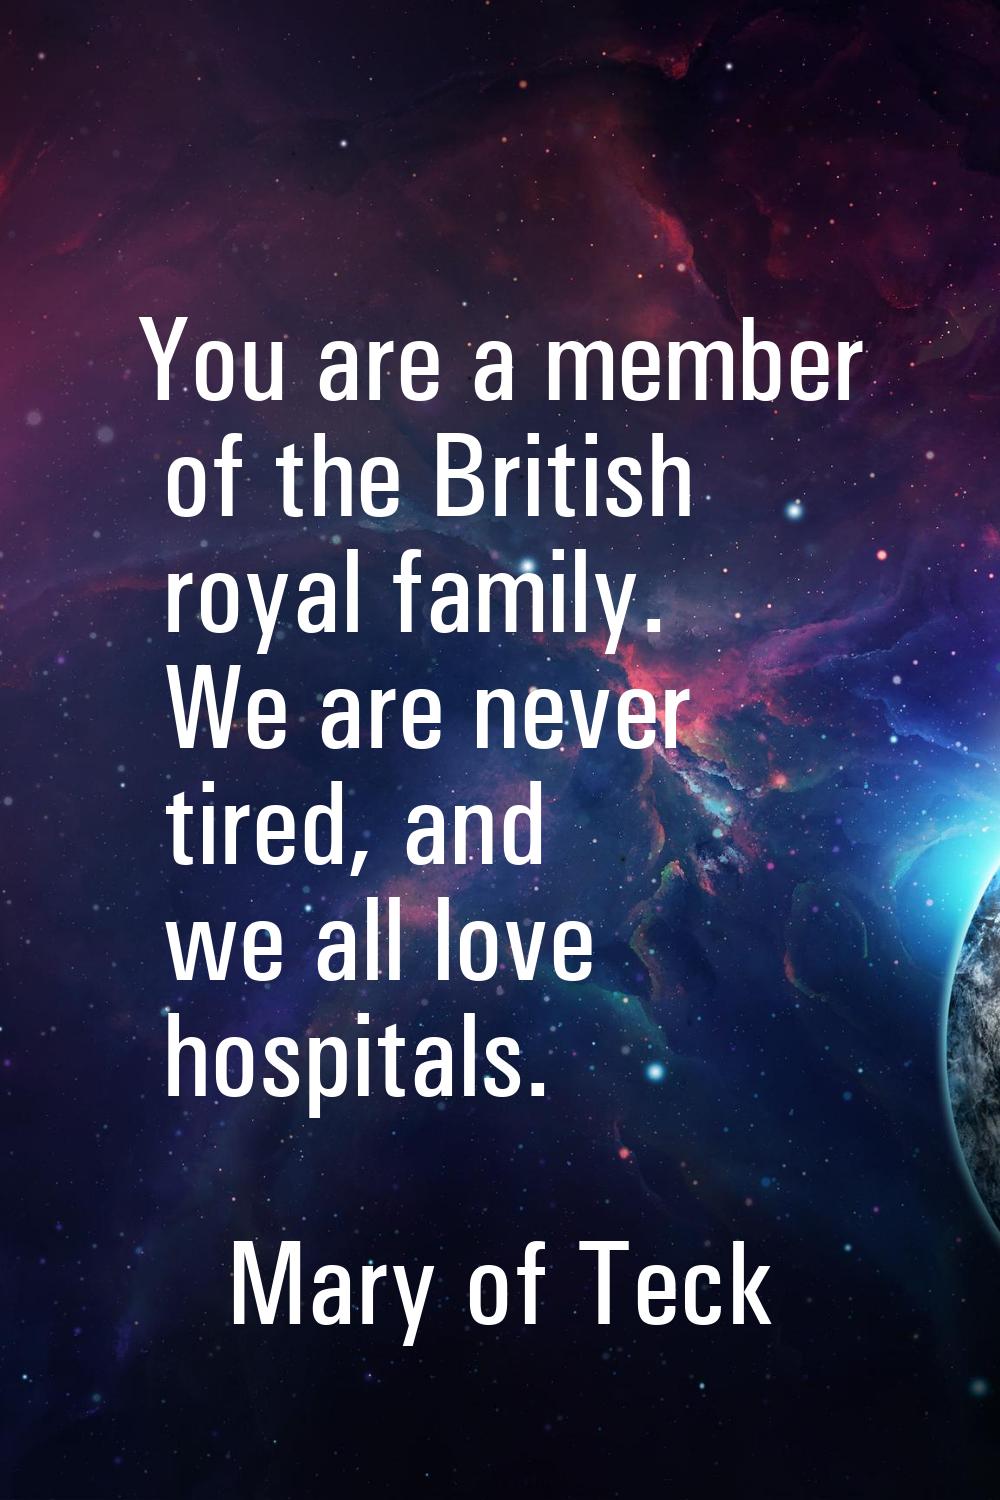 You are a member of the British royal family. We are never tired, and we all love hospitals.